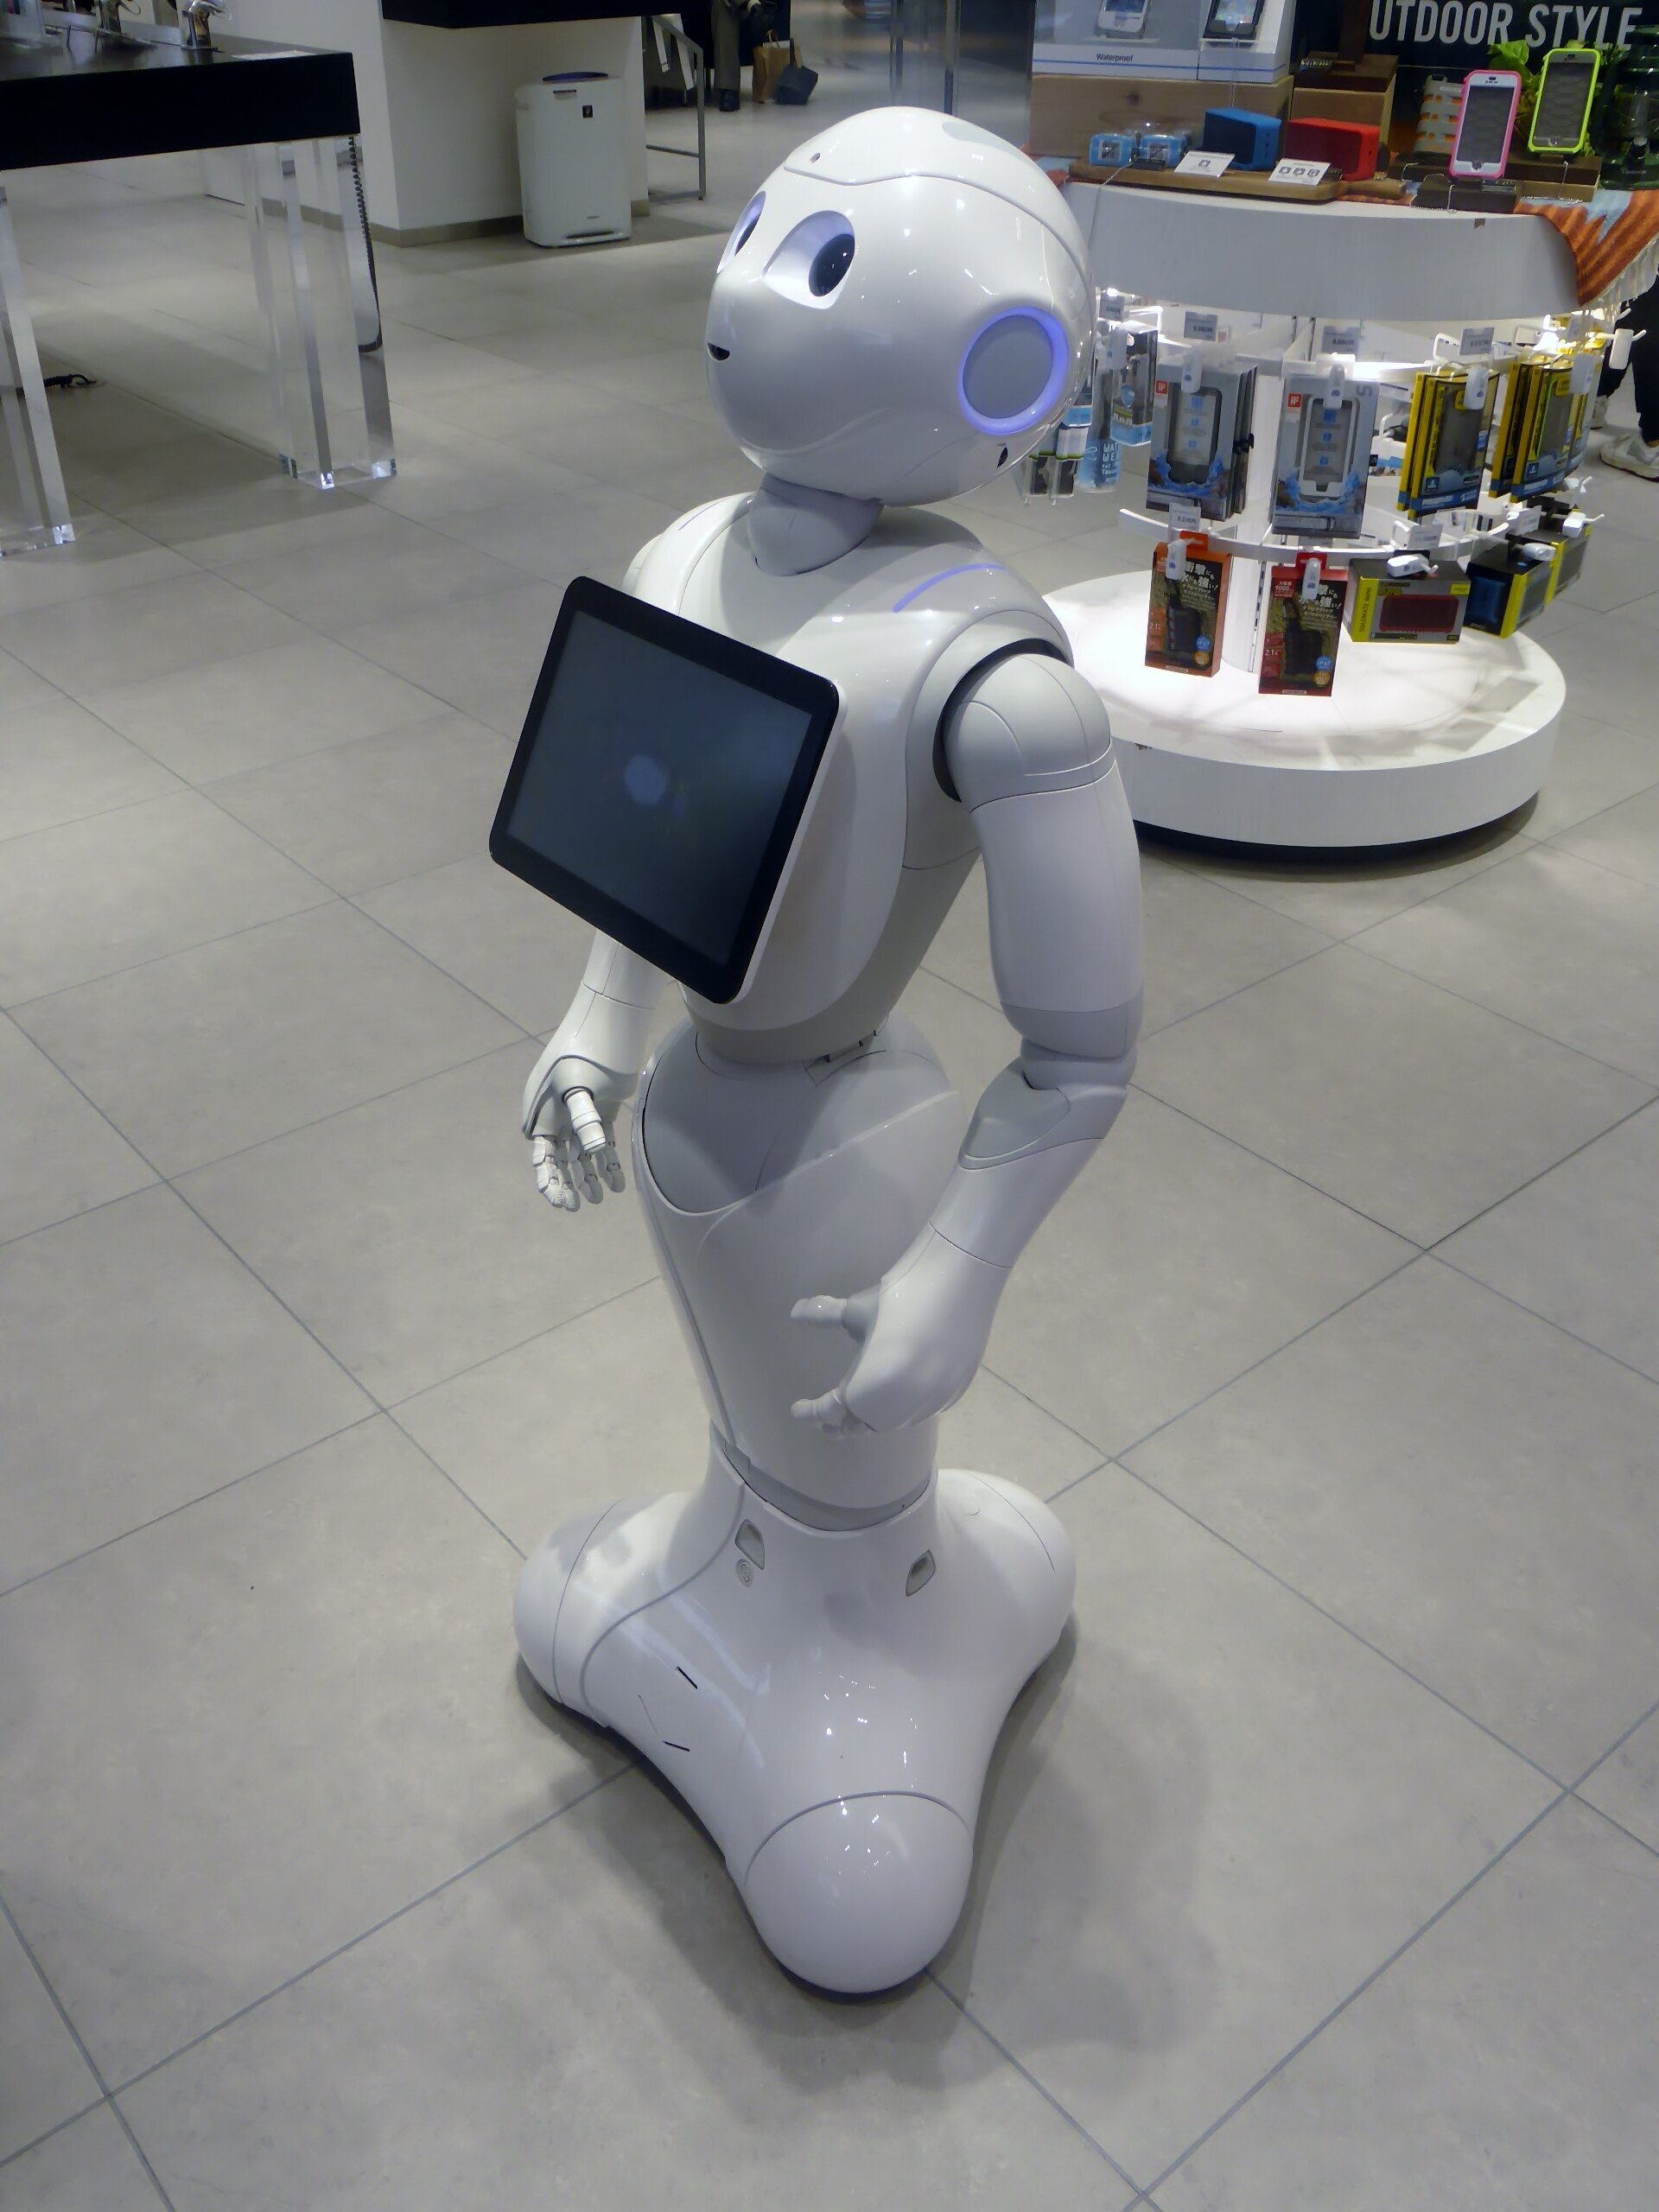 The world's first mass-produced humanoid robot, 